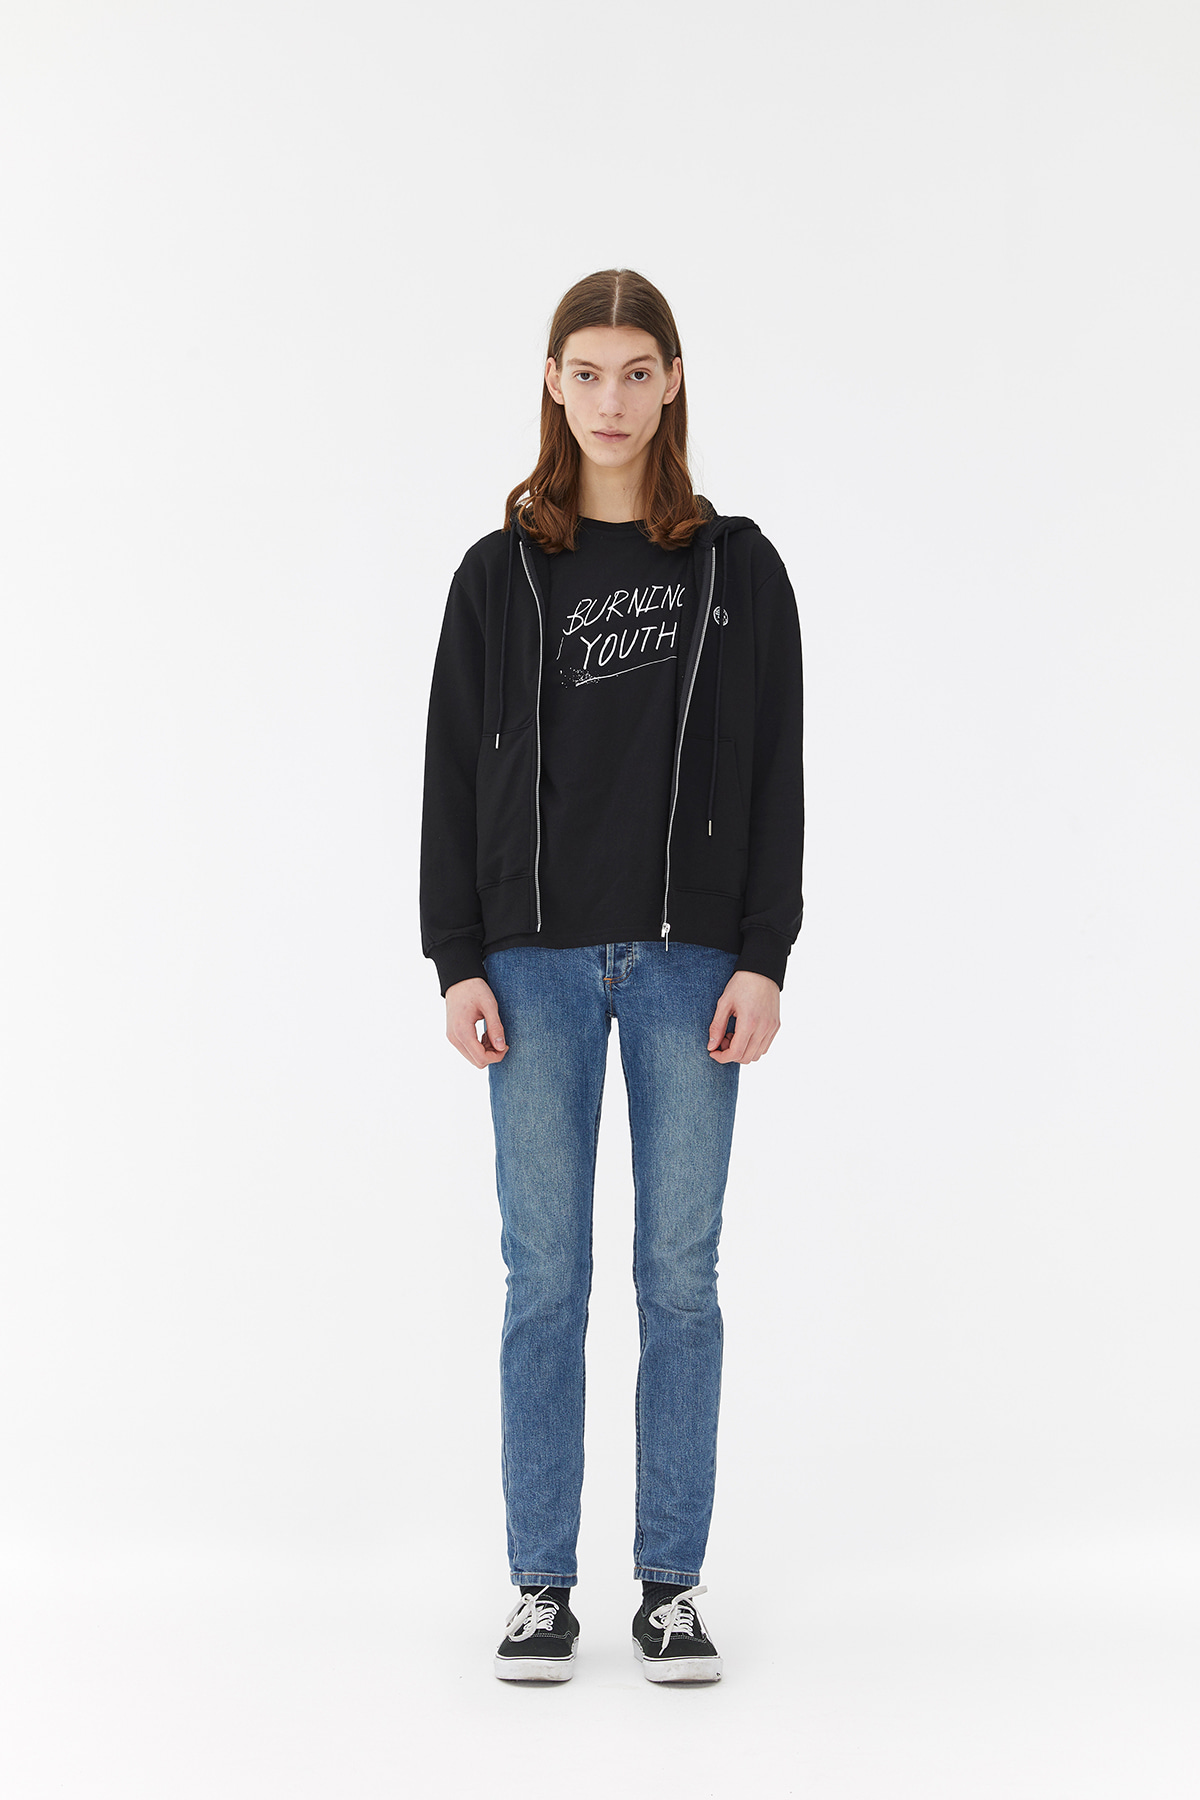 MIRRORBALL EMBROIDERED ROLLING FLOCKED ZIPPED HOODIE BLACK